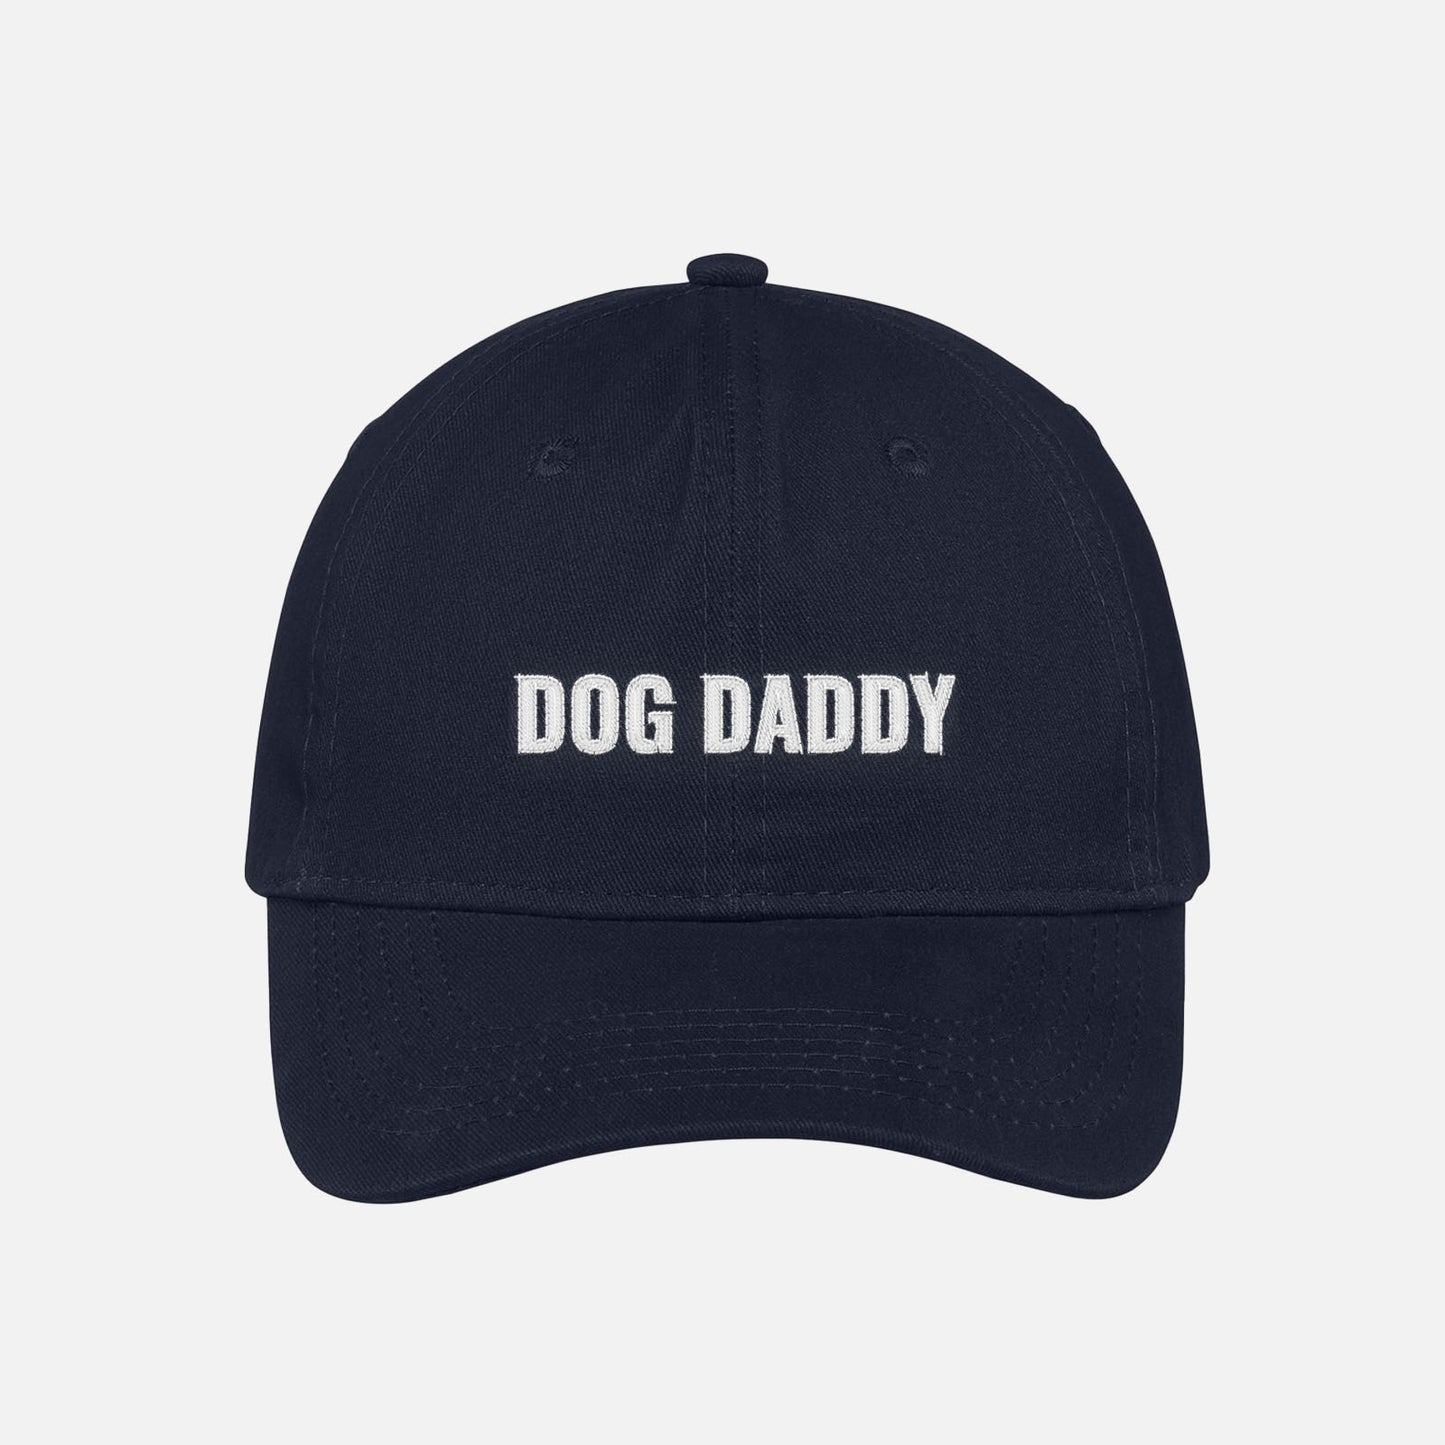 Navy dog daddy dad hat embroidered baseball cap with white text.